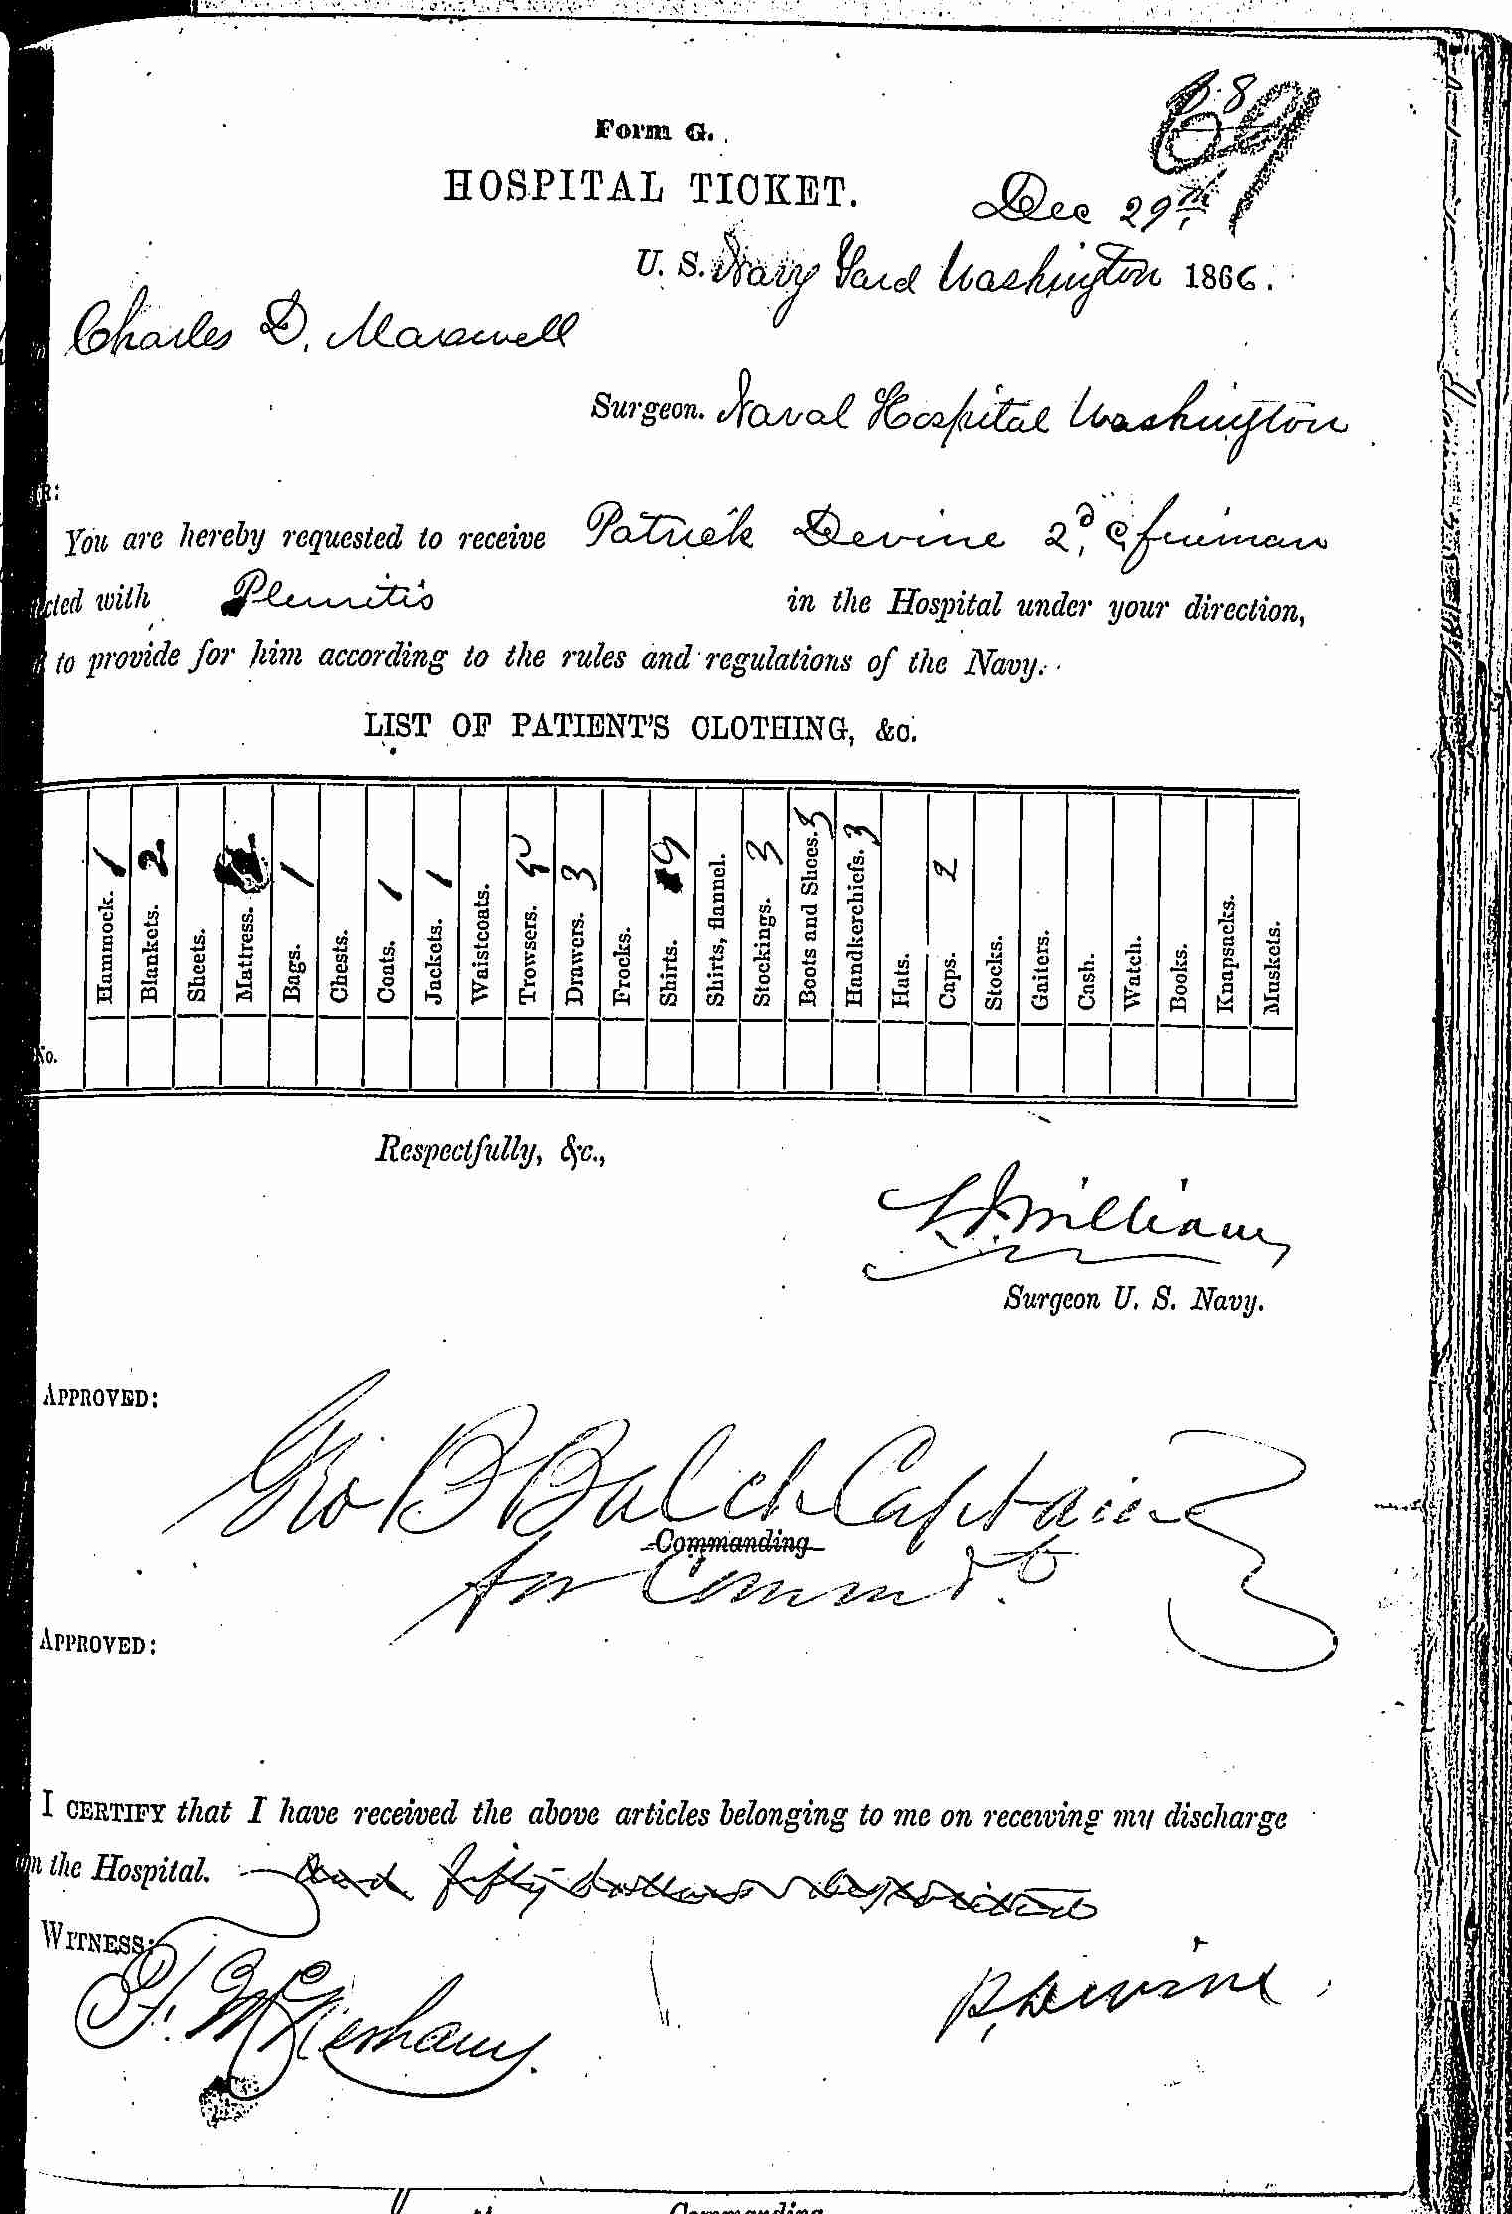 Entry for Patrick Devine (second admission page 1 of 2) in the log Hospital Tickets and Case Papers - Naval Hospital - Washington, D.C. - 1865-68